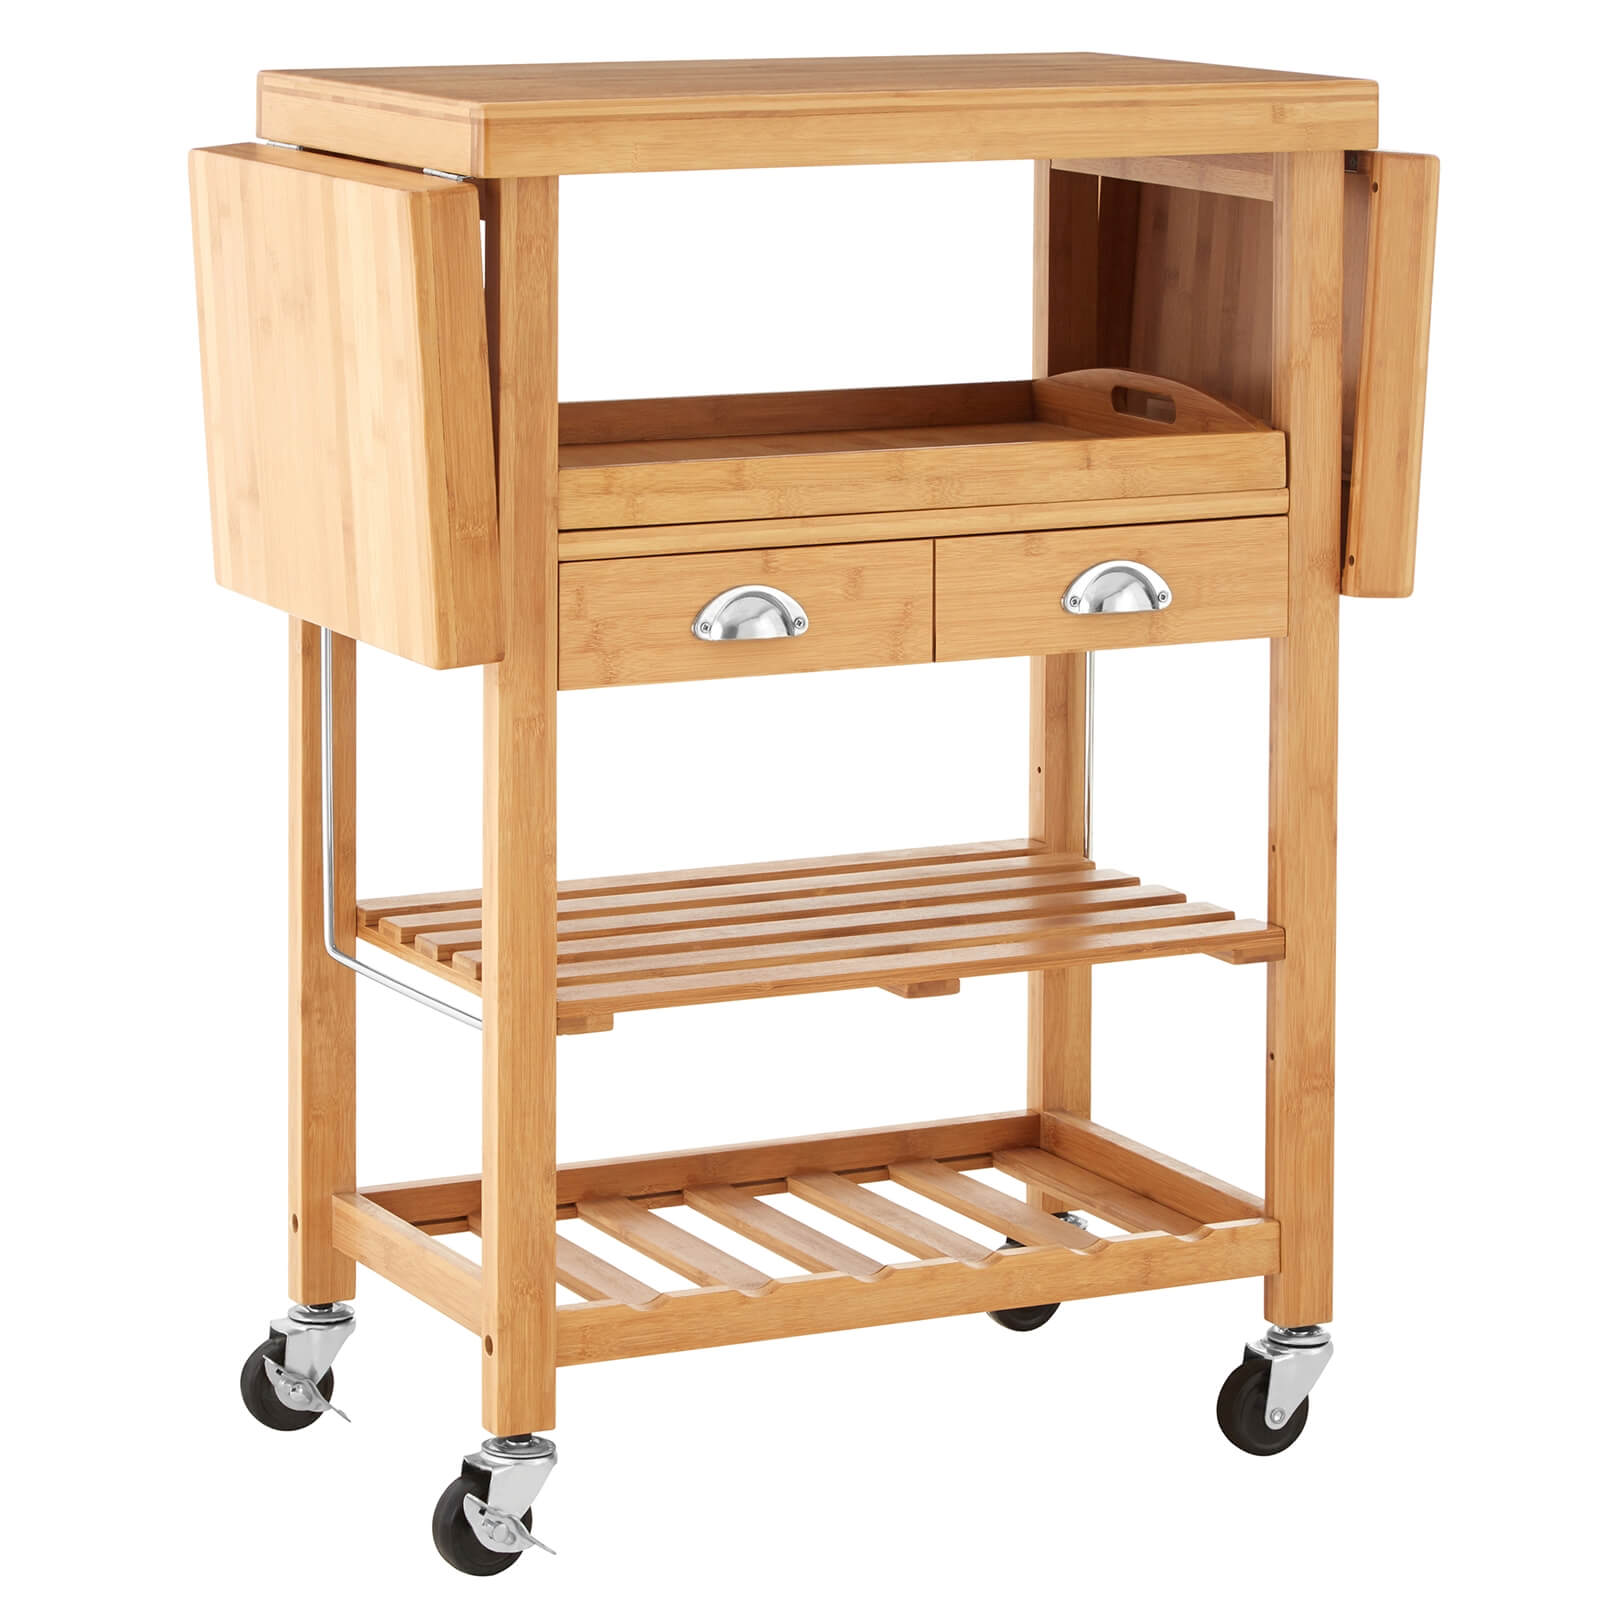 Bamboo Kitchen Trolley